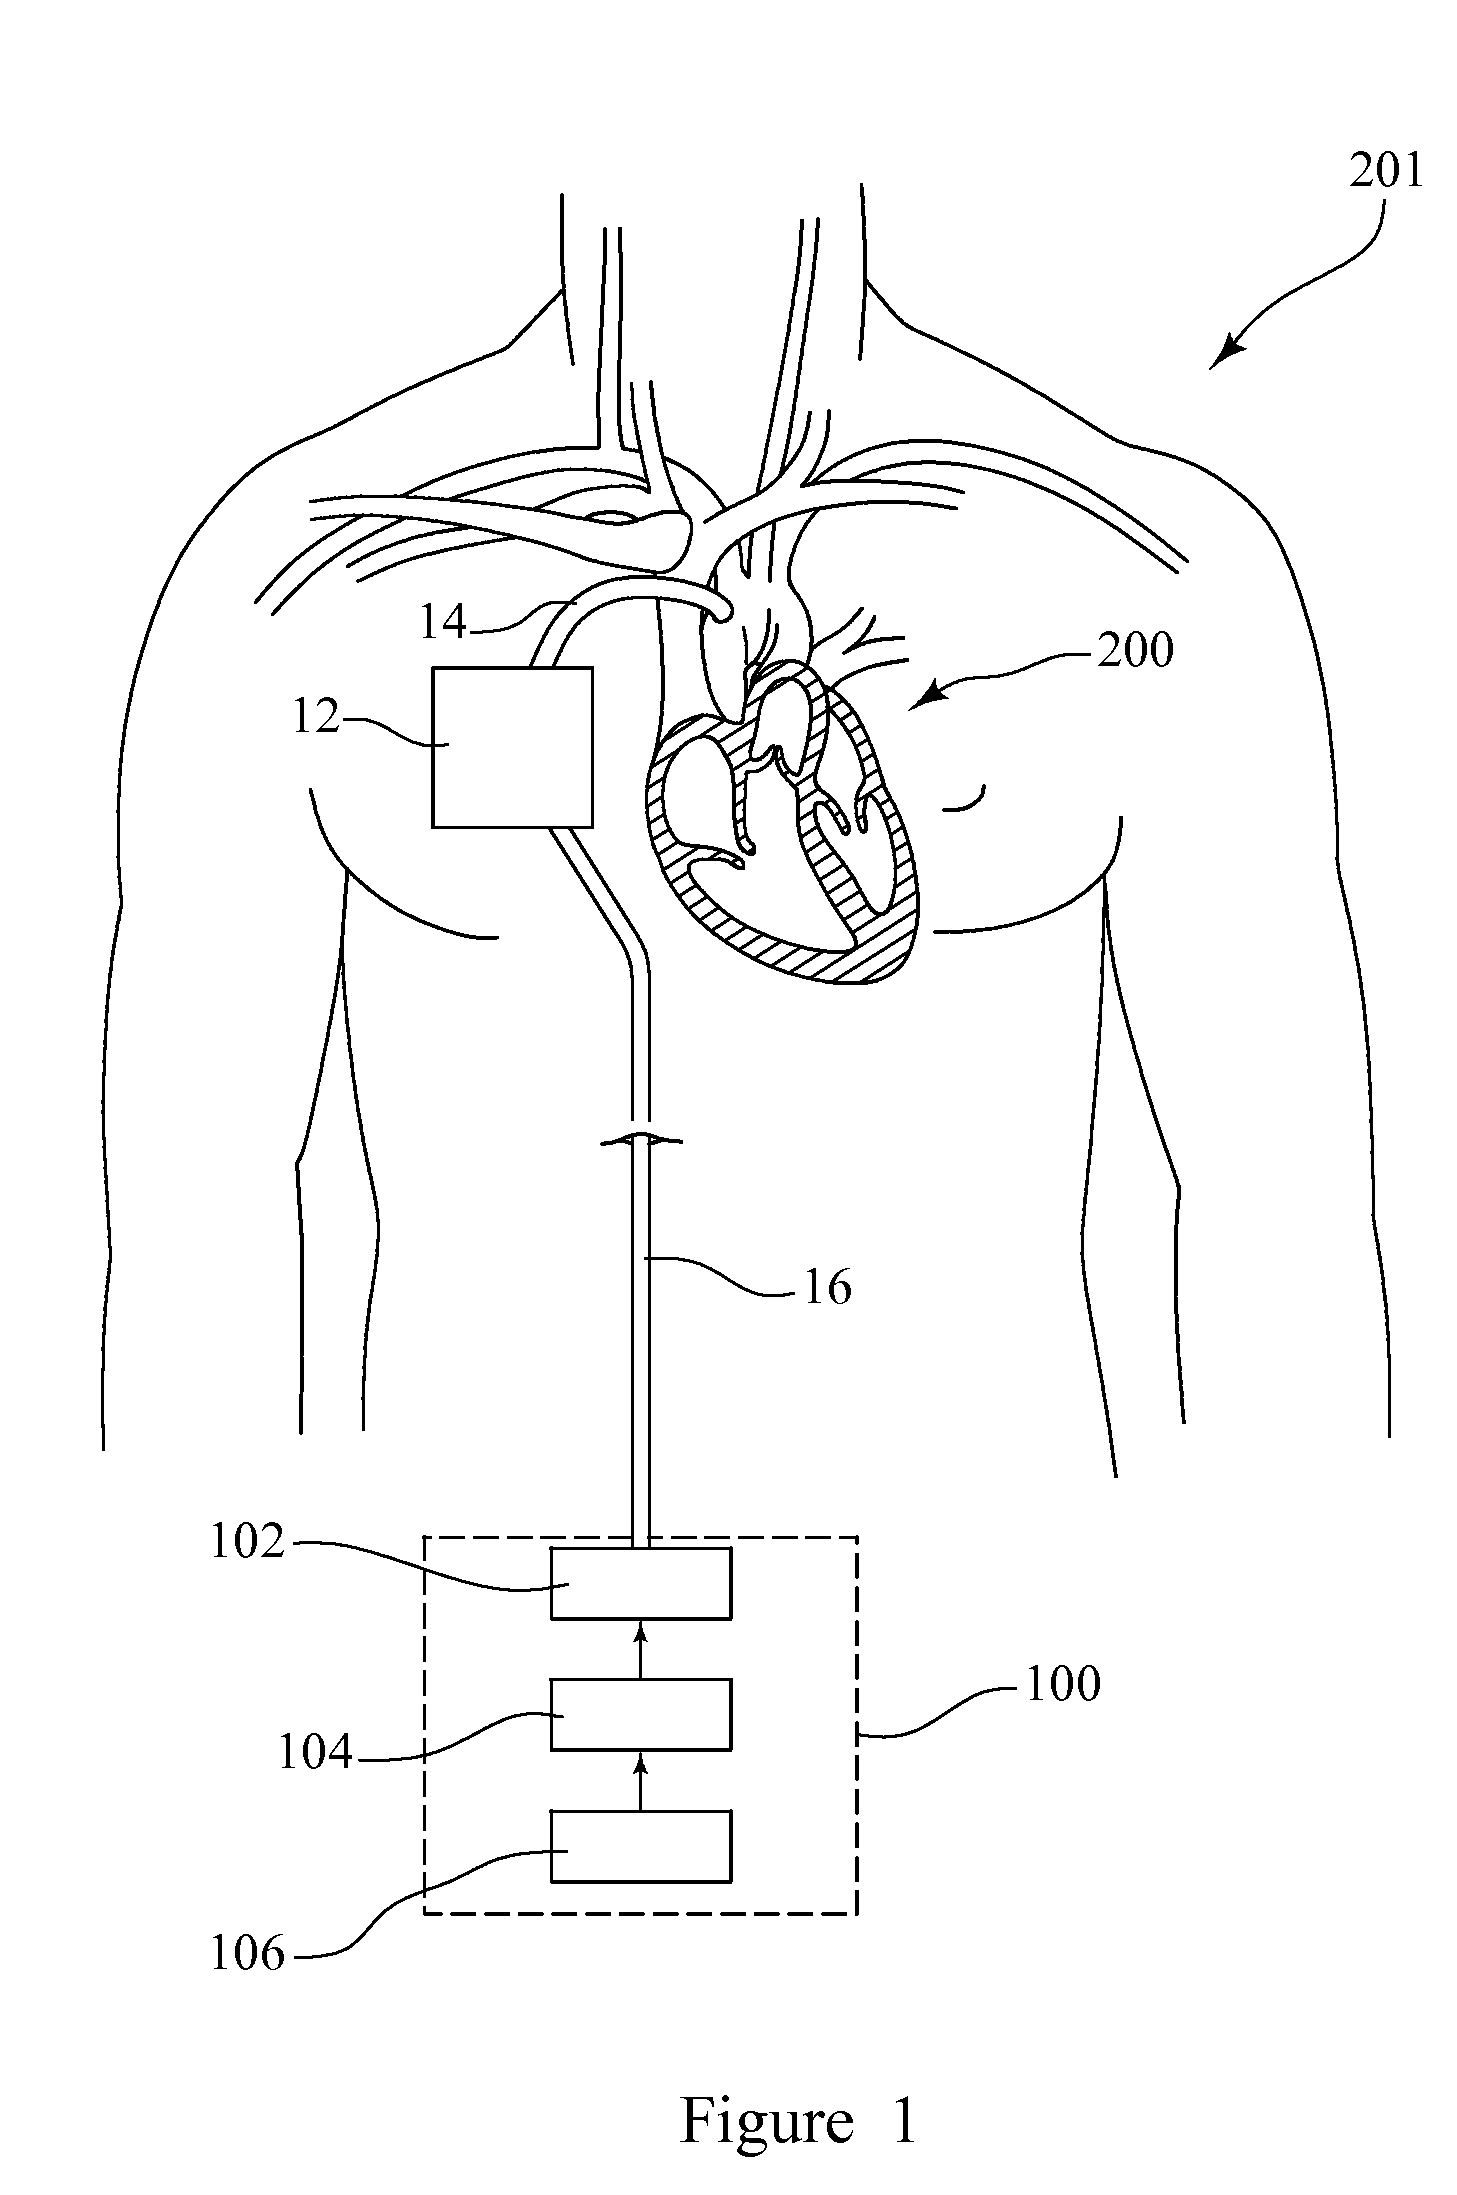 System and method for providing cardiac support and promoting myocardial recovery